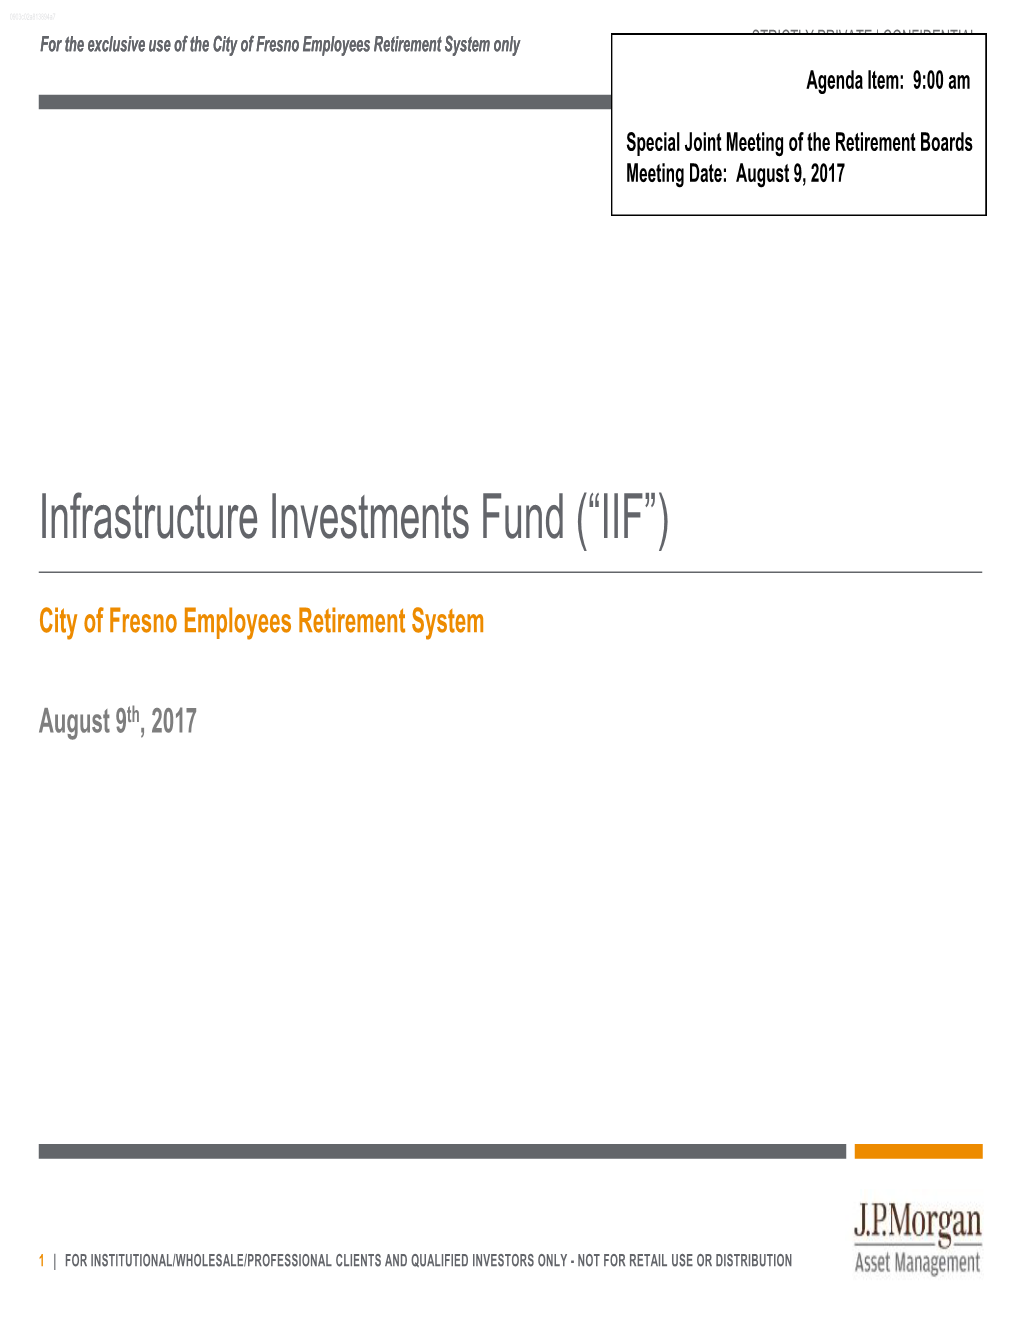 Infrastructure Investments Fund (“IIF”)